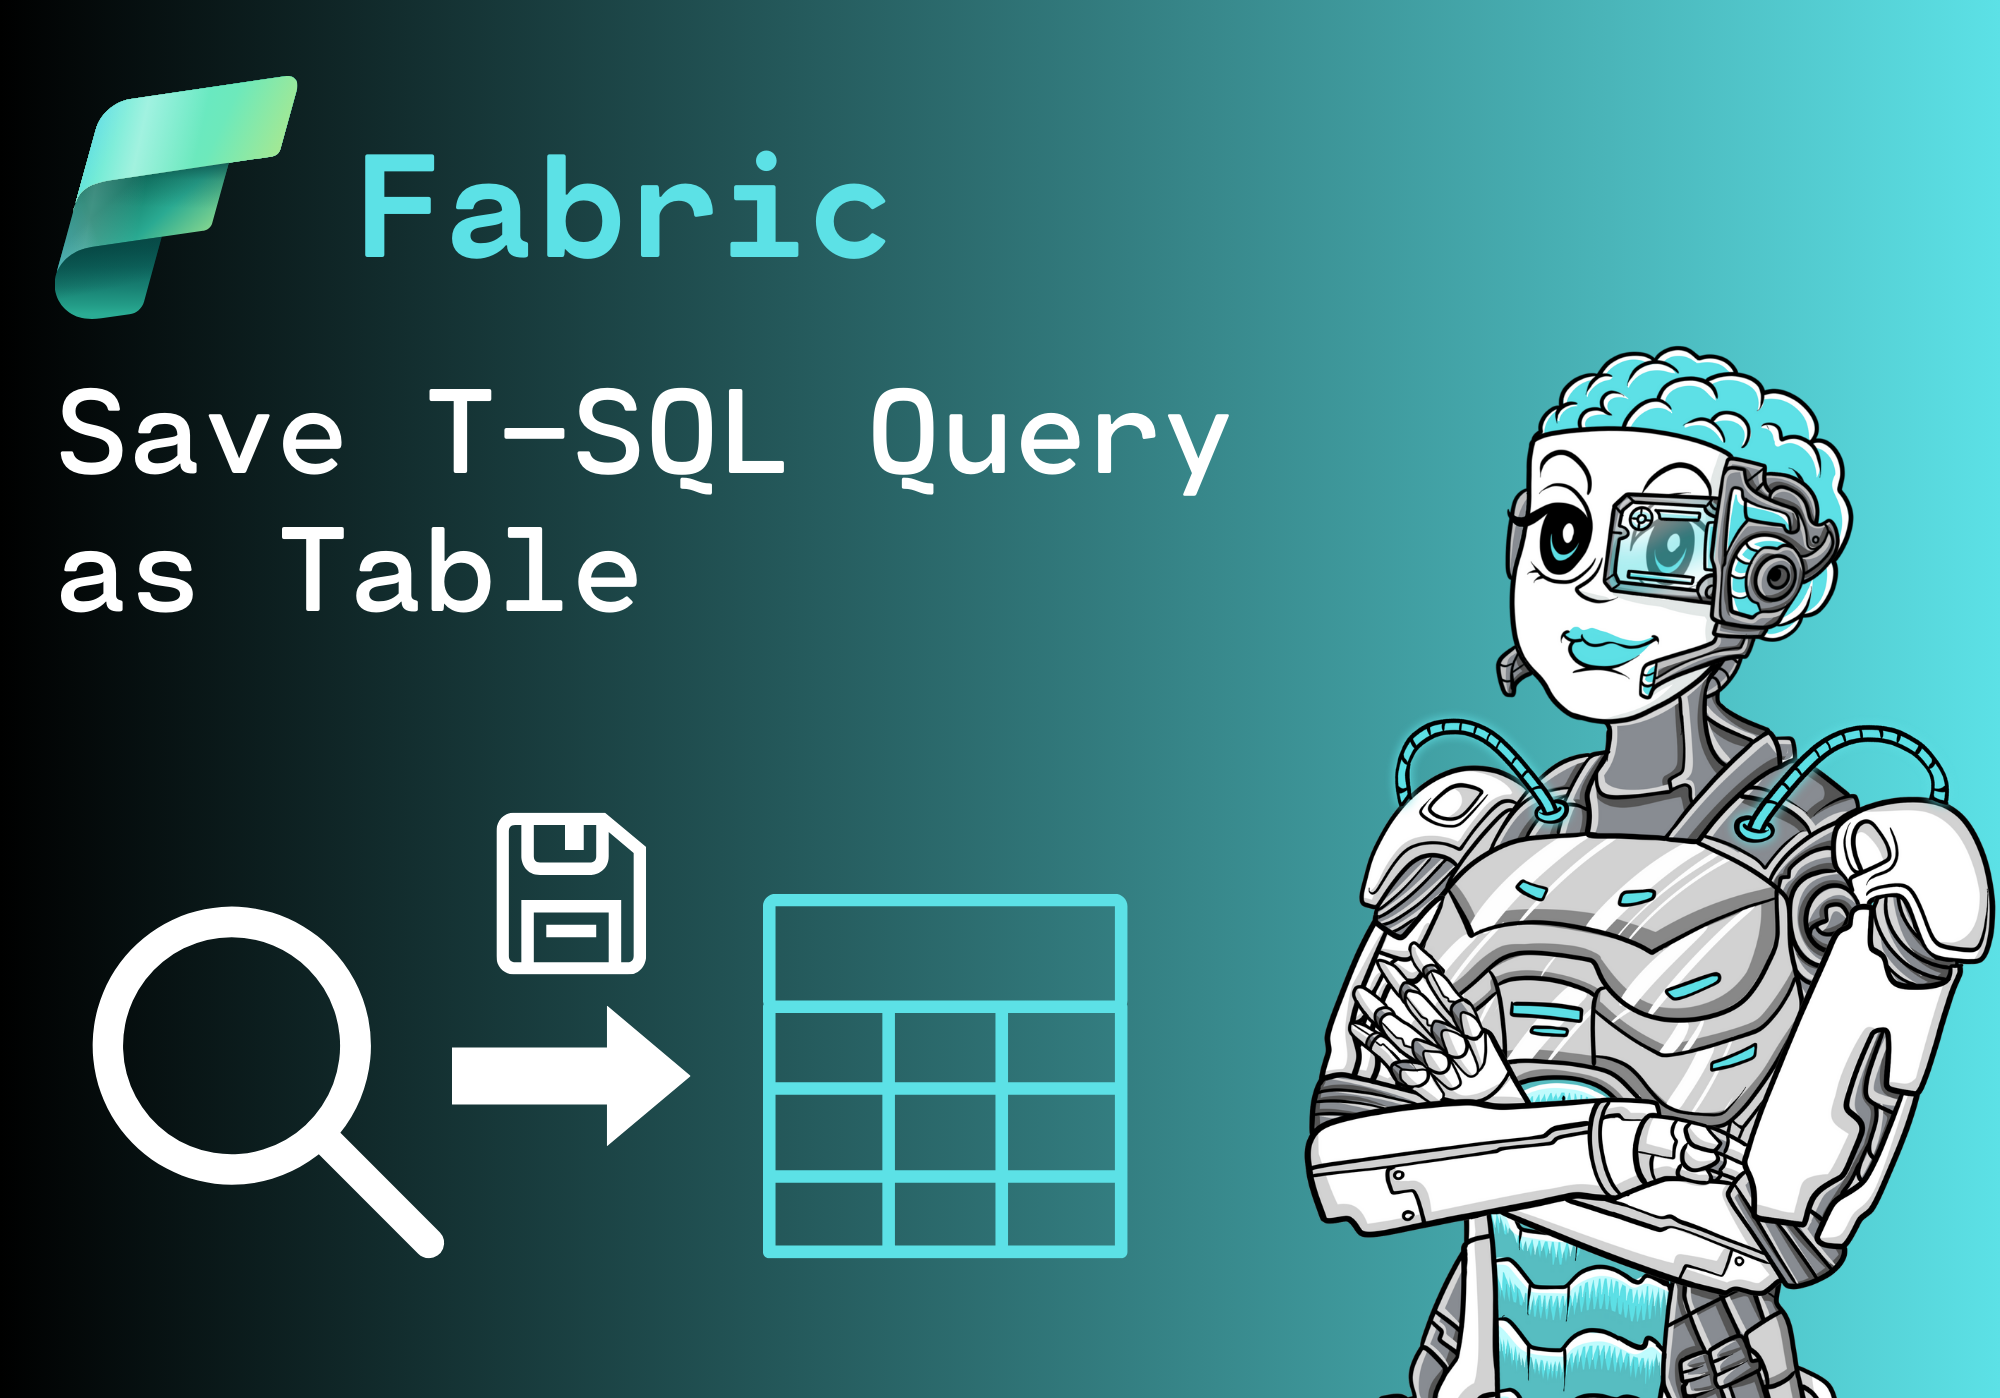 How to save a T-SQL Query as Table in Microsoft Fabric